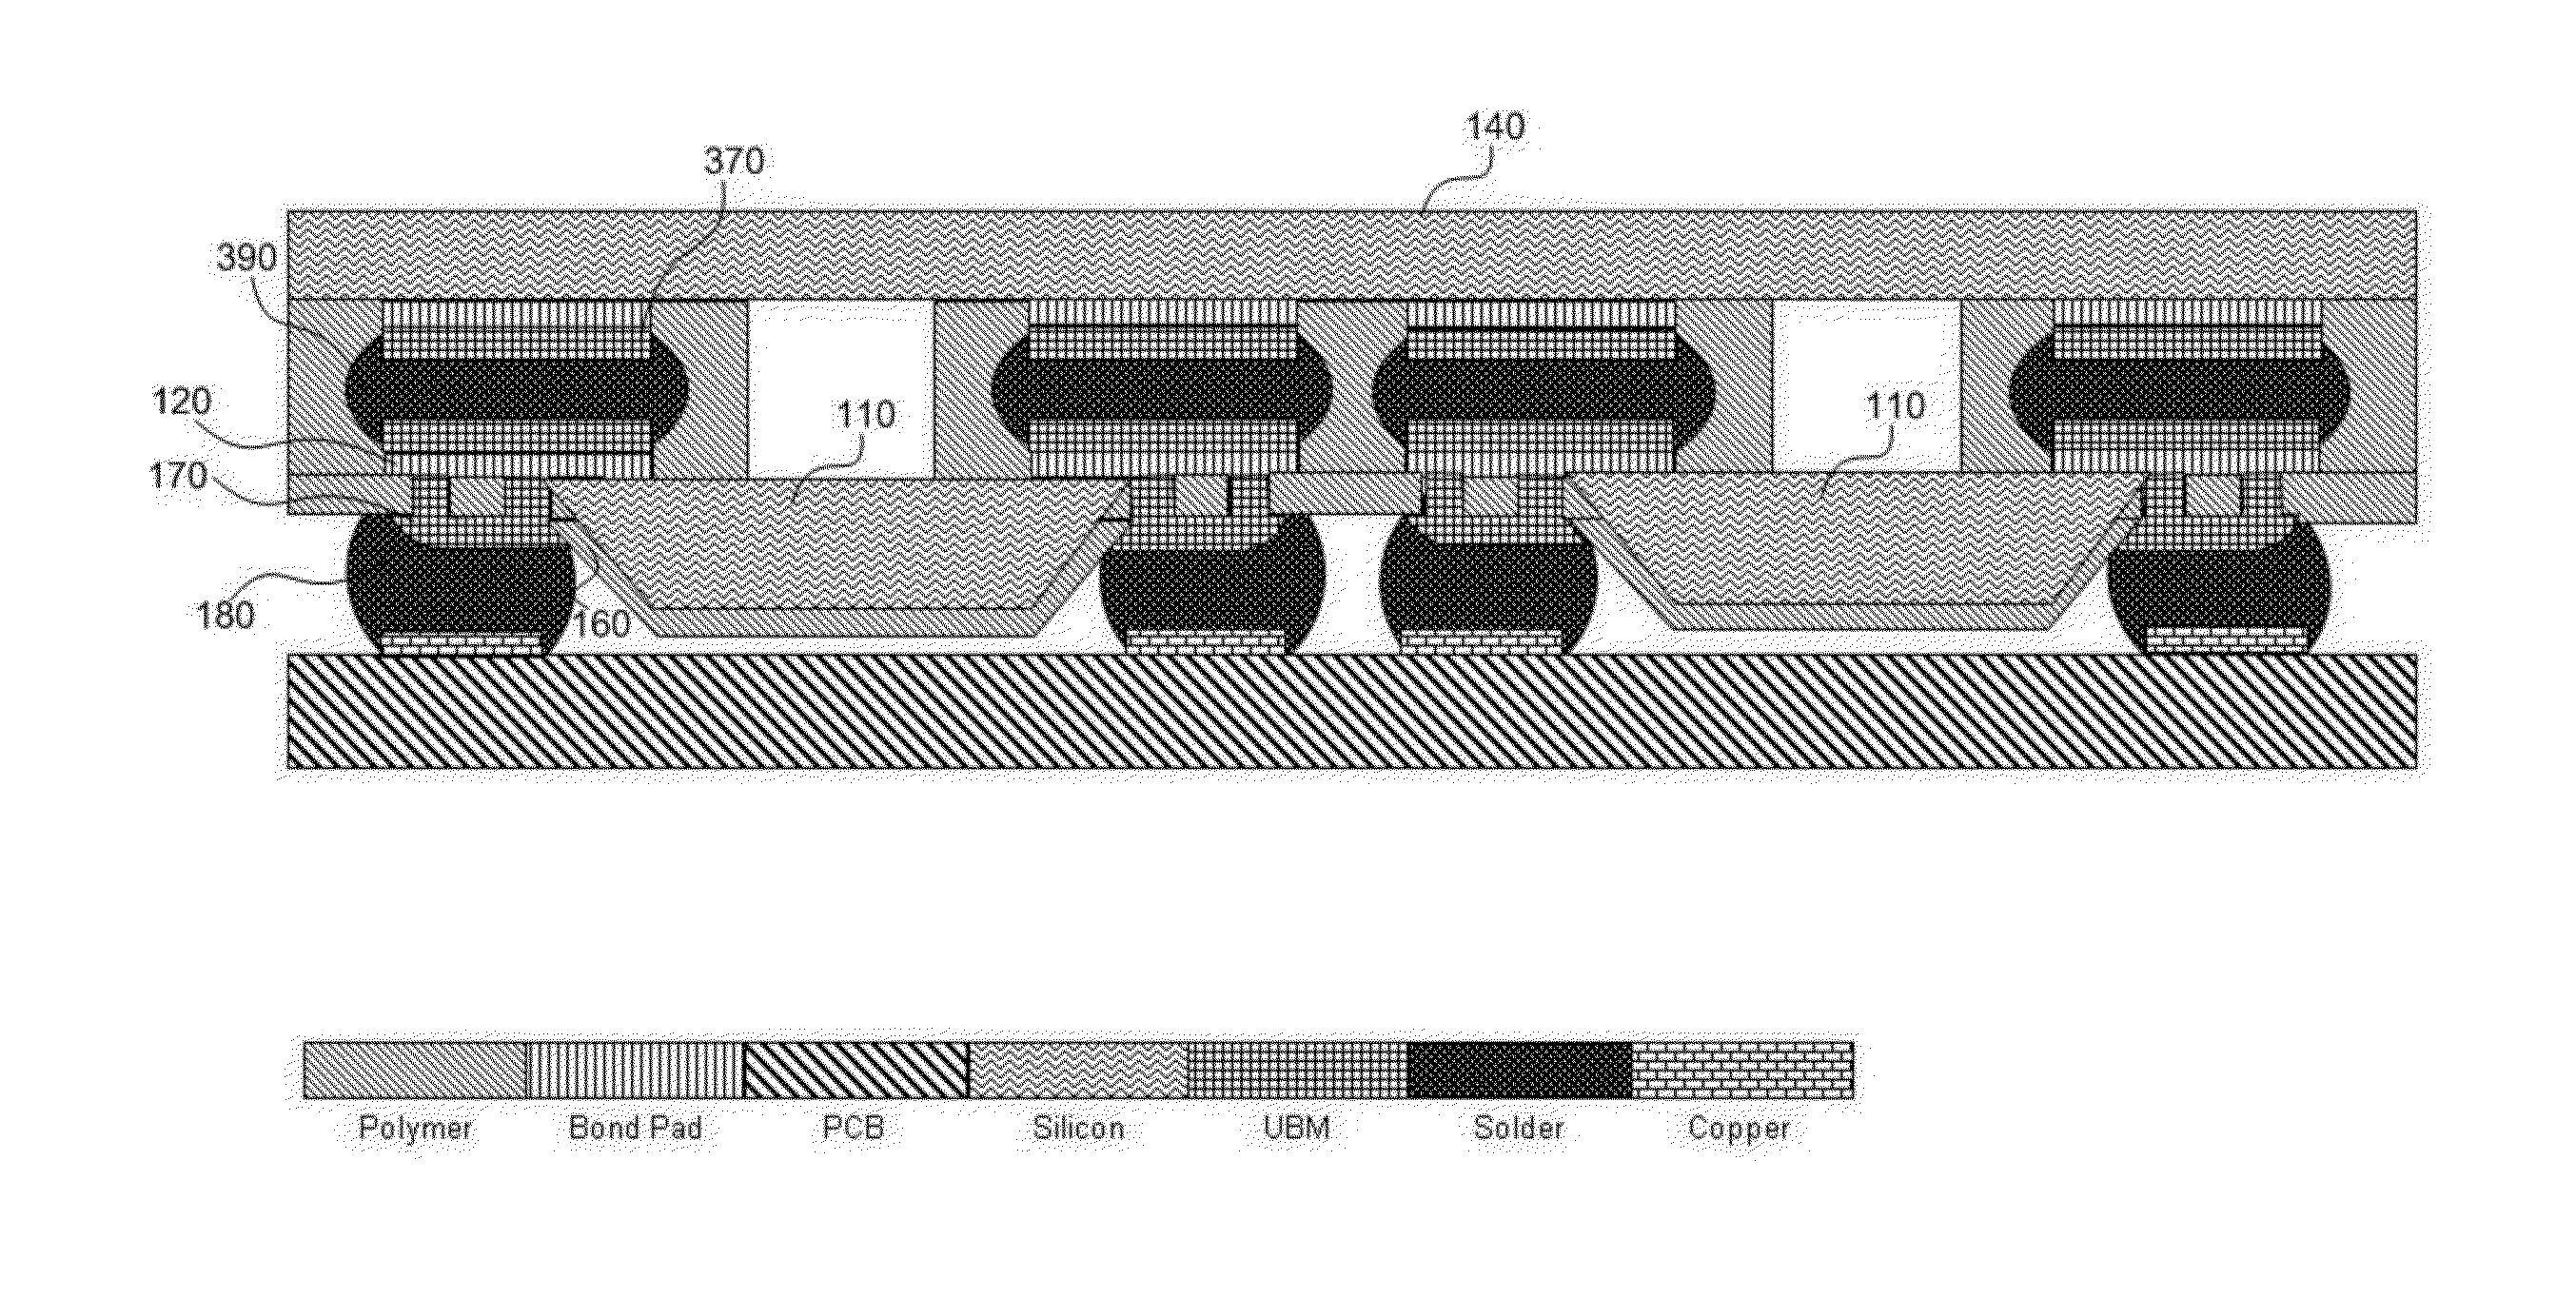 Wafer-level device packaging